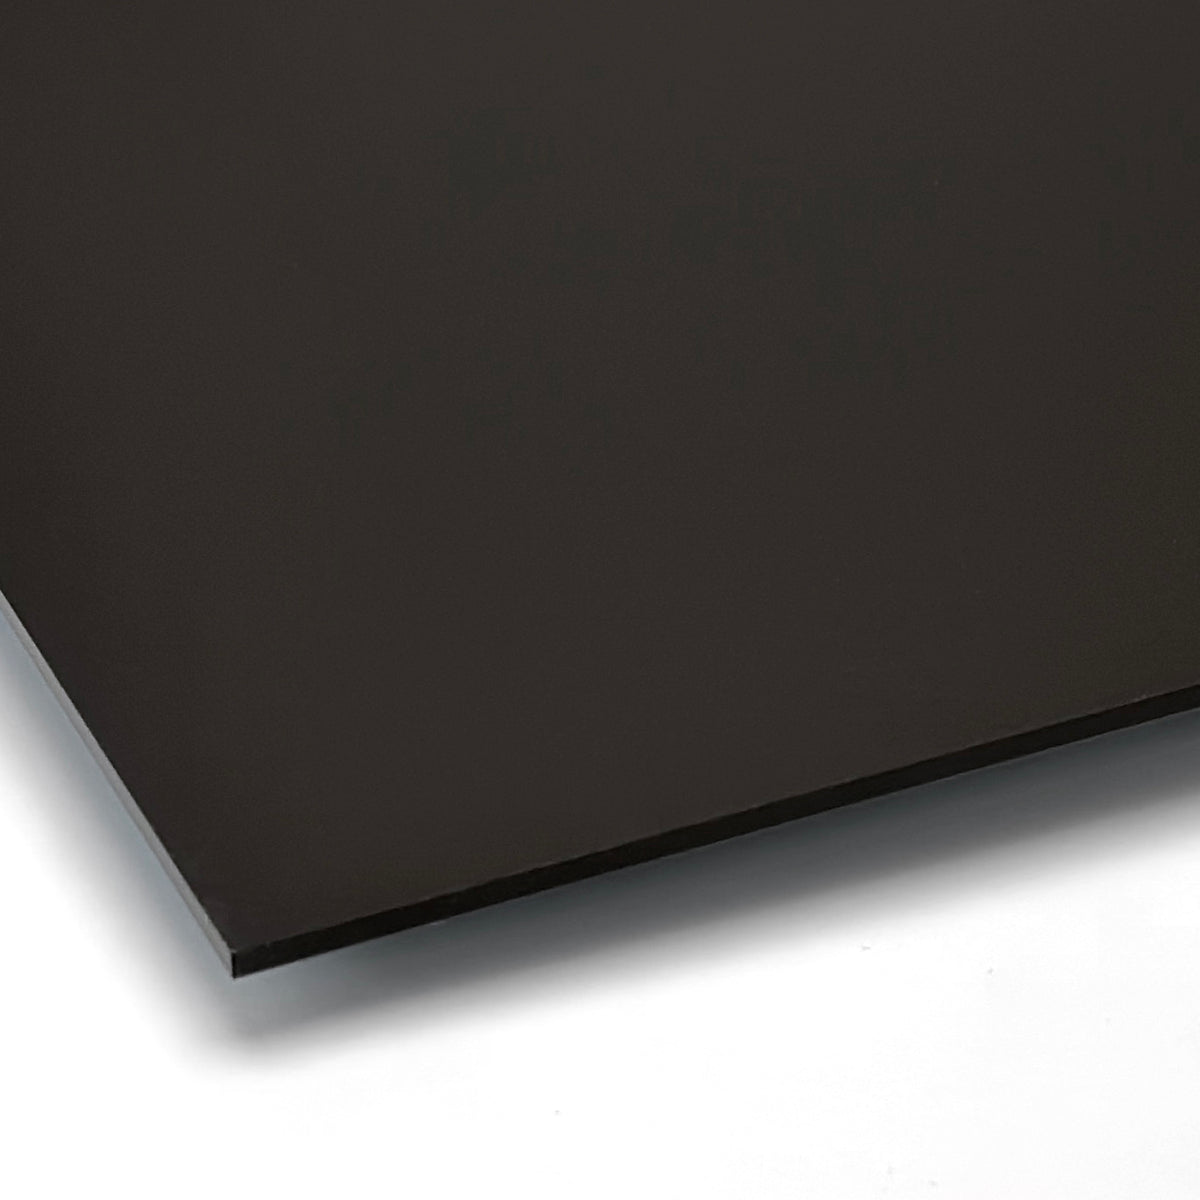 Matte Black Acrylic with laser cutting only - 300x200mm